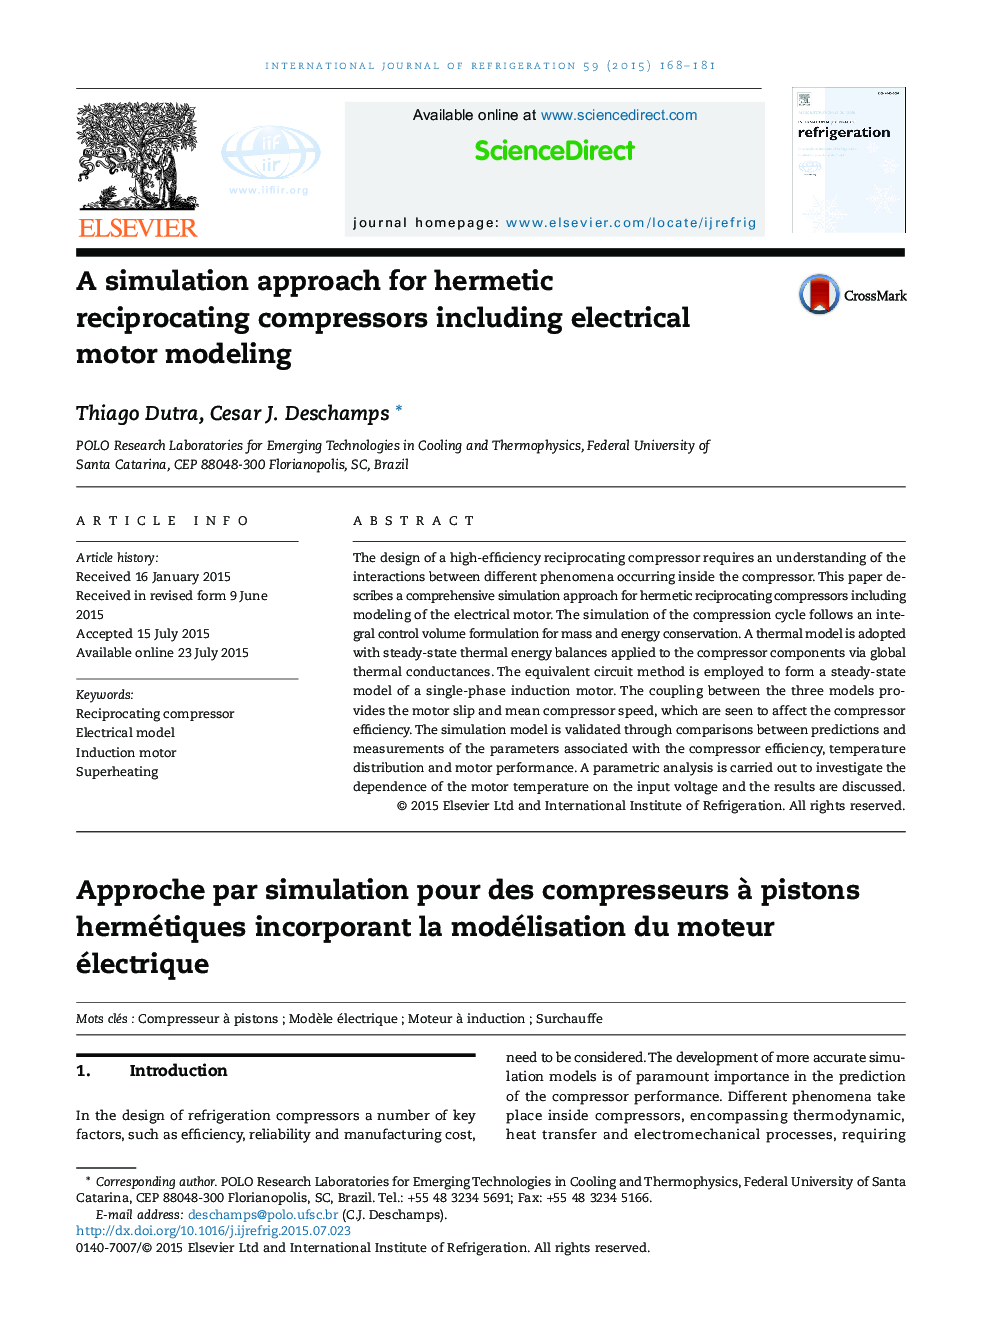 A simulation approach for hermetic reciprocating compressors including electrical motor modeling